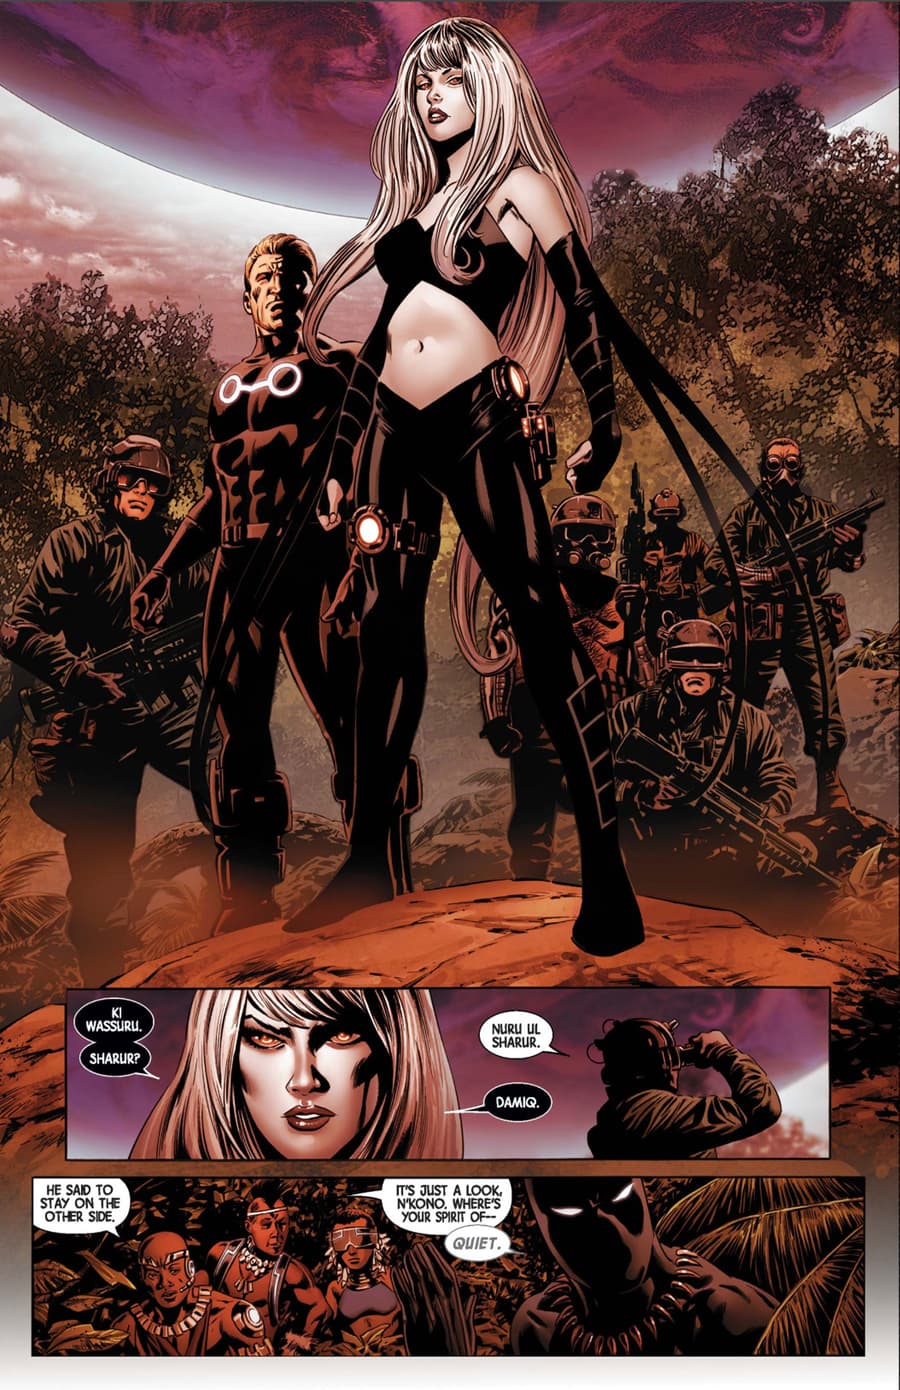 NEW AVENGERS (2013) #1 page by Jonathan Hickman, Steve Epting, and Rick Magyar